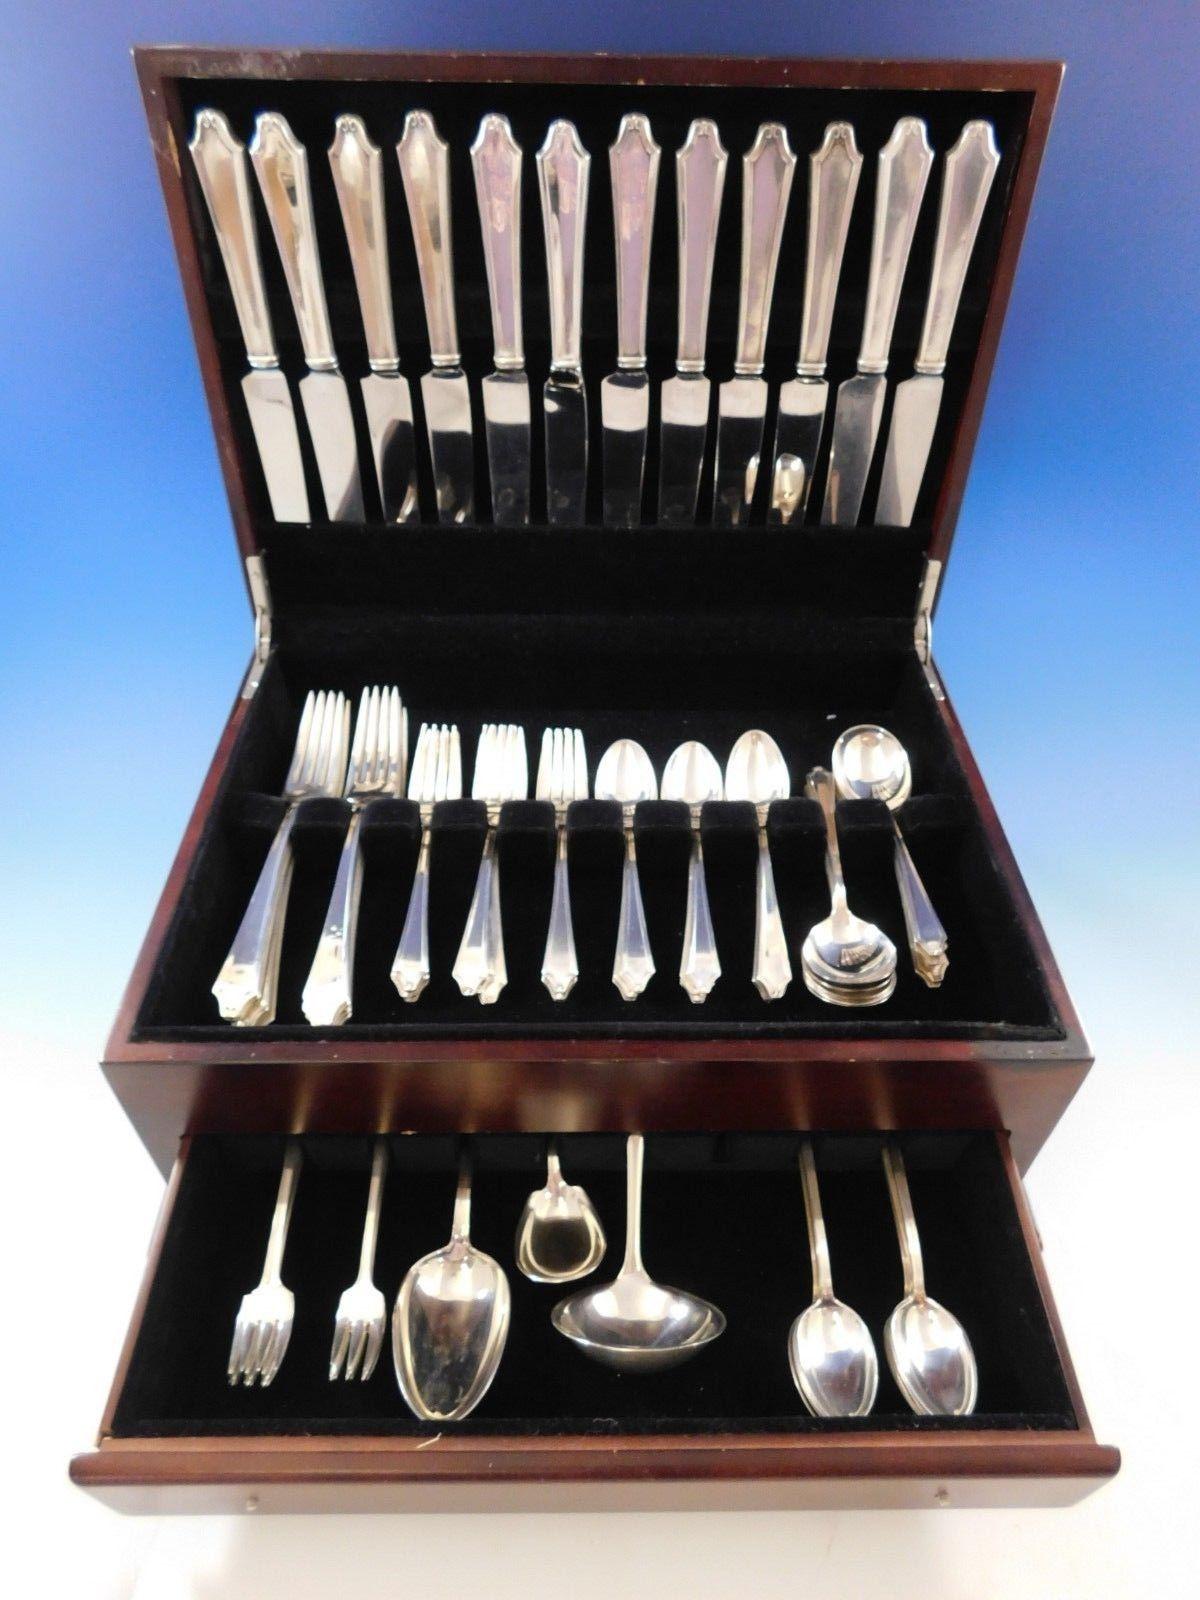 Beautiful minuet by International sterling silver flatware set - 87 pieces. This set includes:

12 dinner knives, 9 5/8